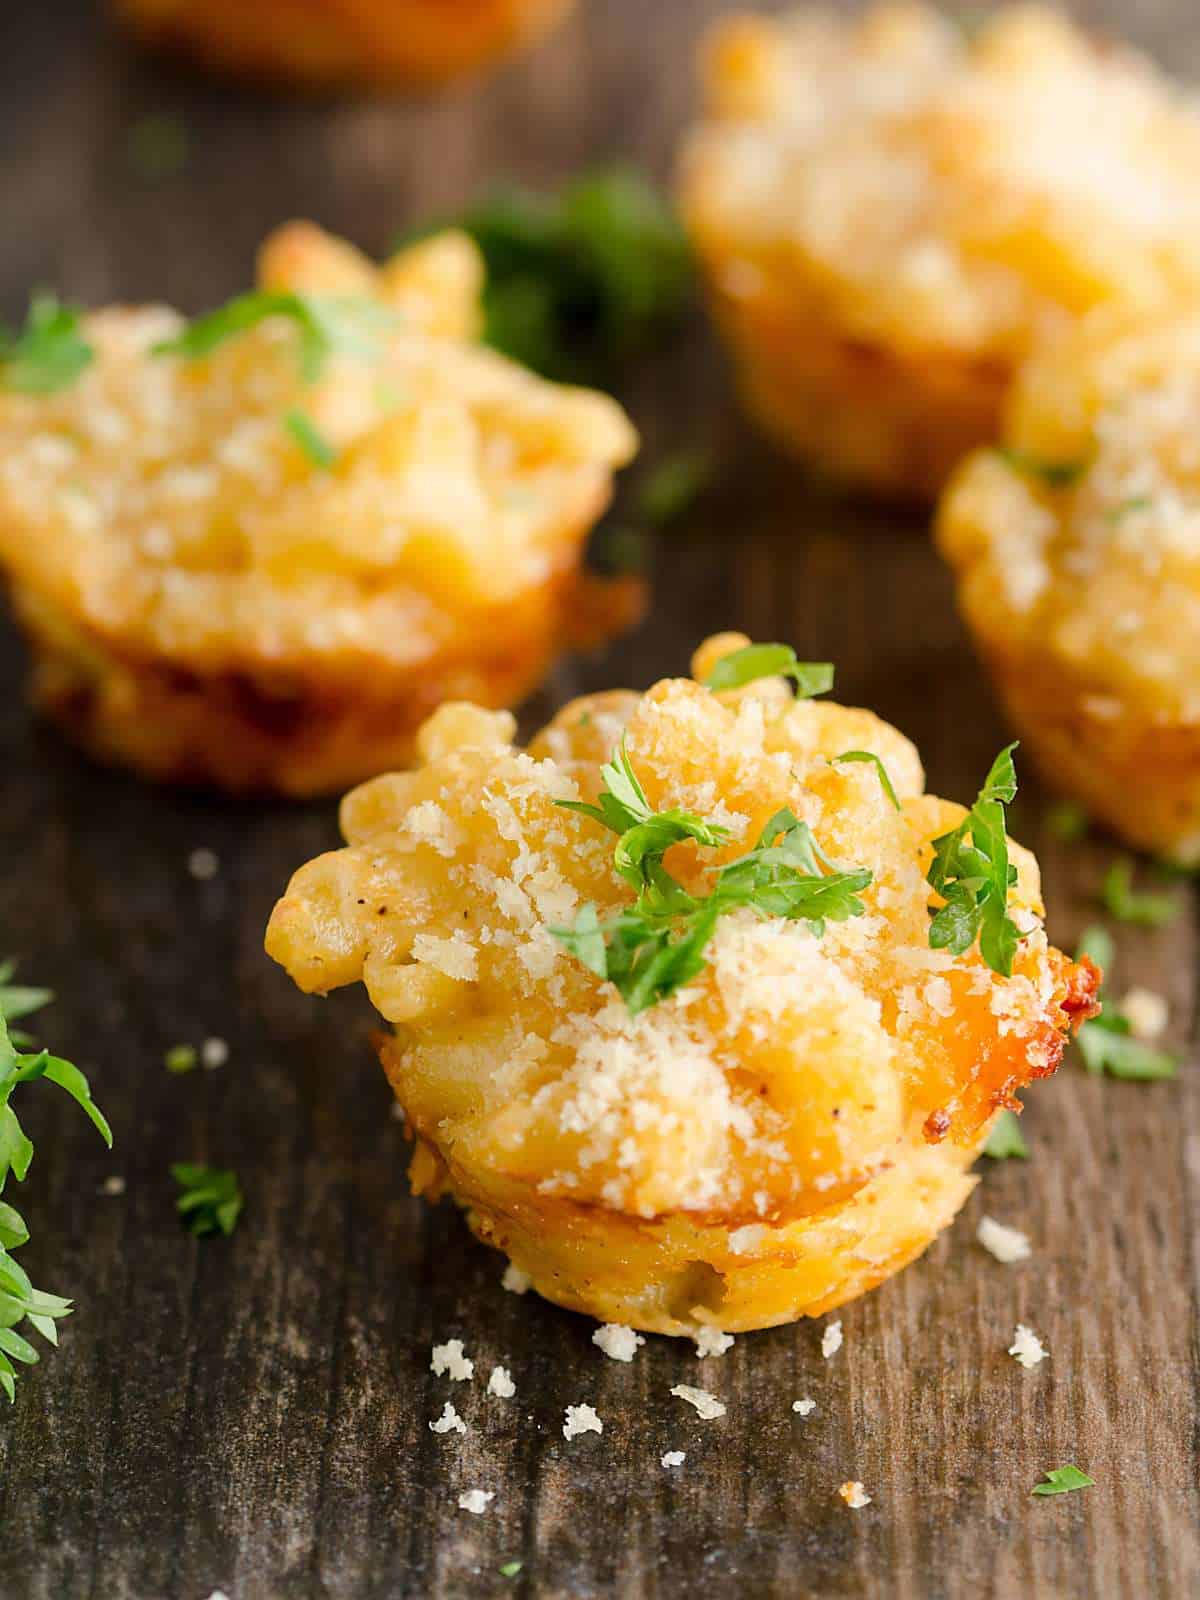 baked lobster mac and cheese "bites" garnished with parsley. 